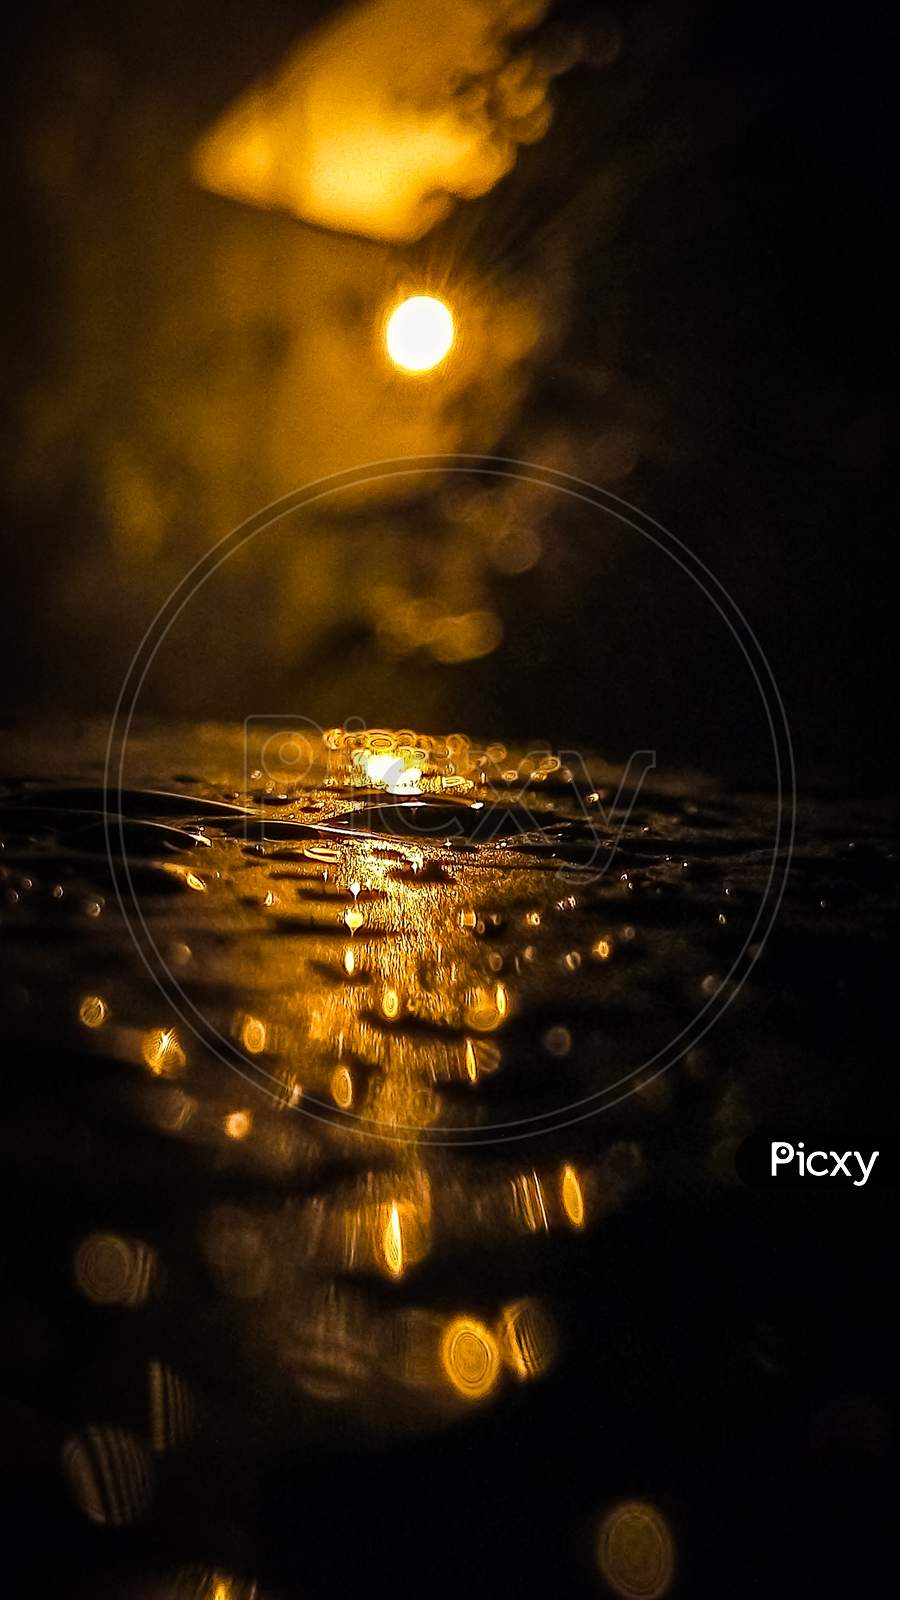 Image of Rain drops Photography by Sam Belieber-YZ944861-Picxy